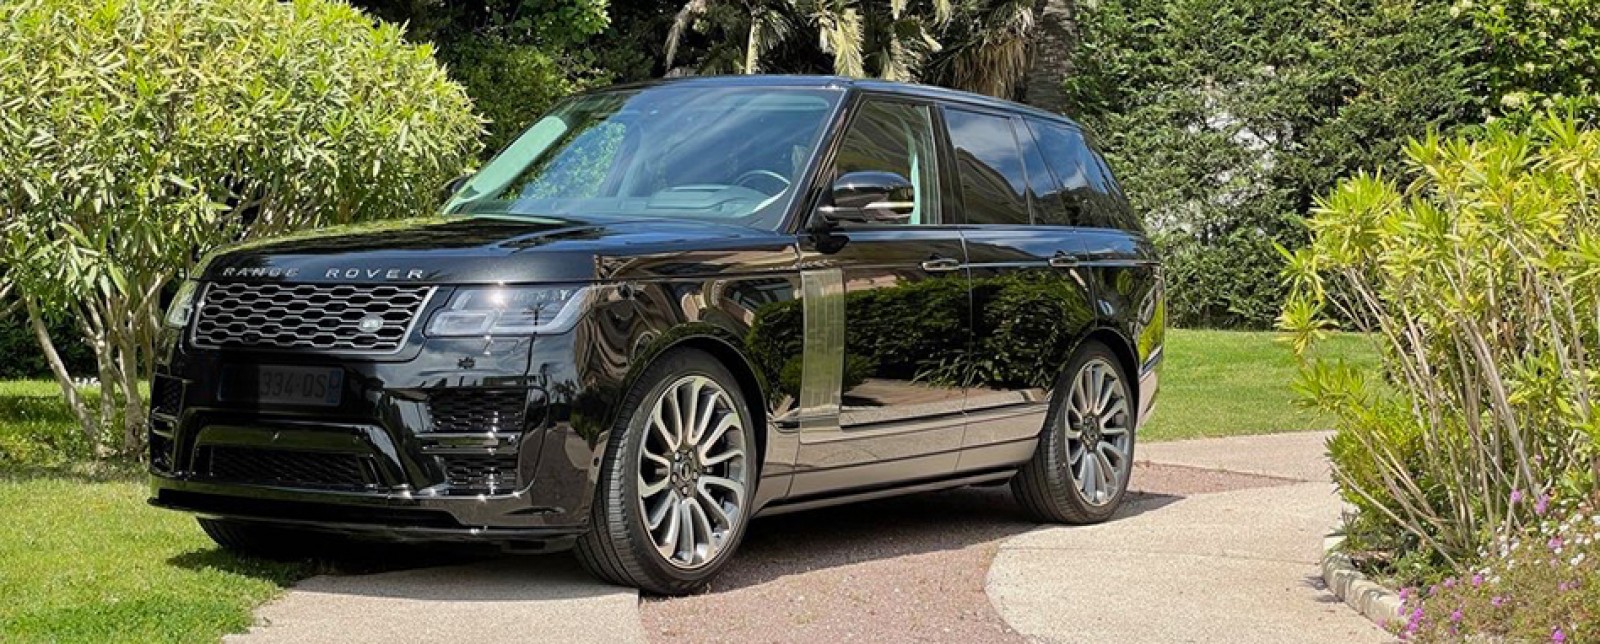 Private Chauffeur in Megève - Premium Vehicles & Services - Reactivity 24/7 - Ruby Services - Car Rental with Driver in Megève - Range Rover